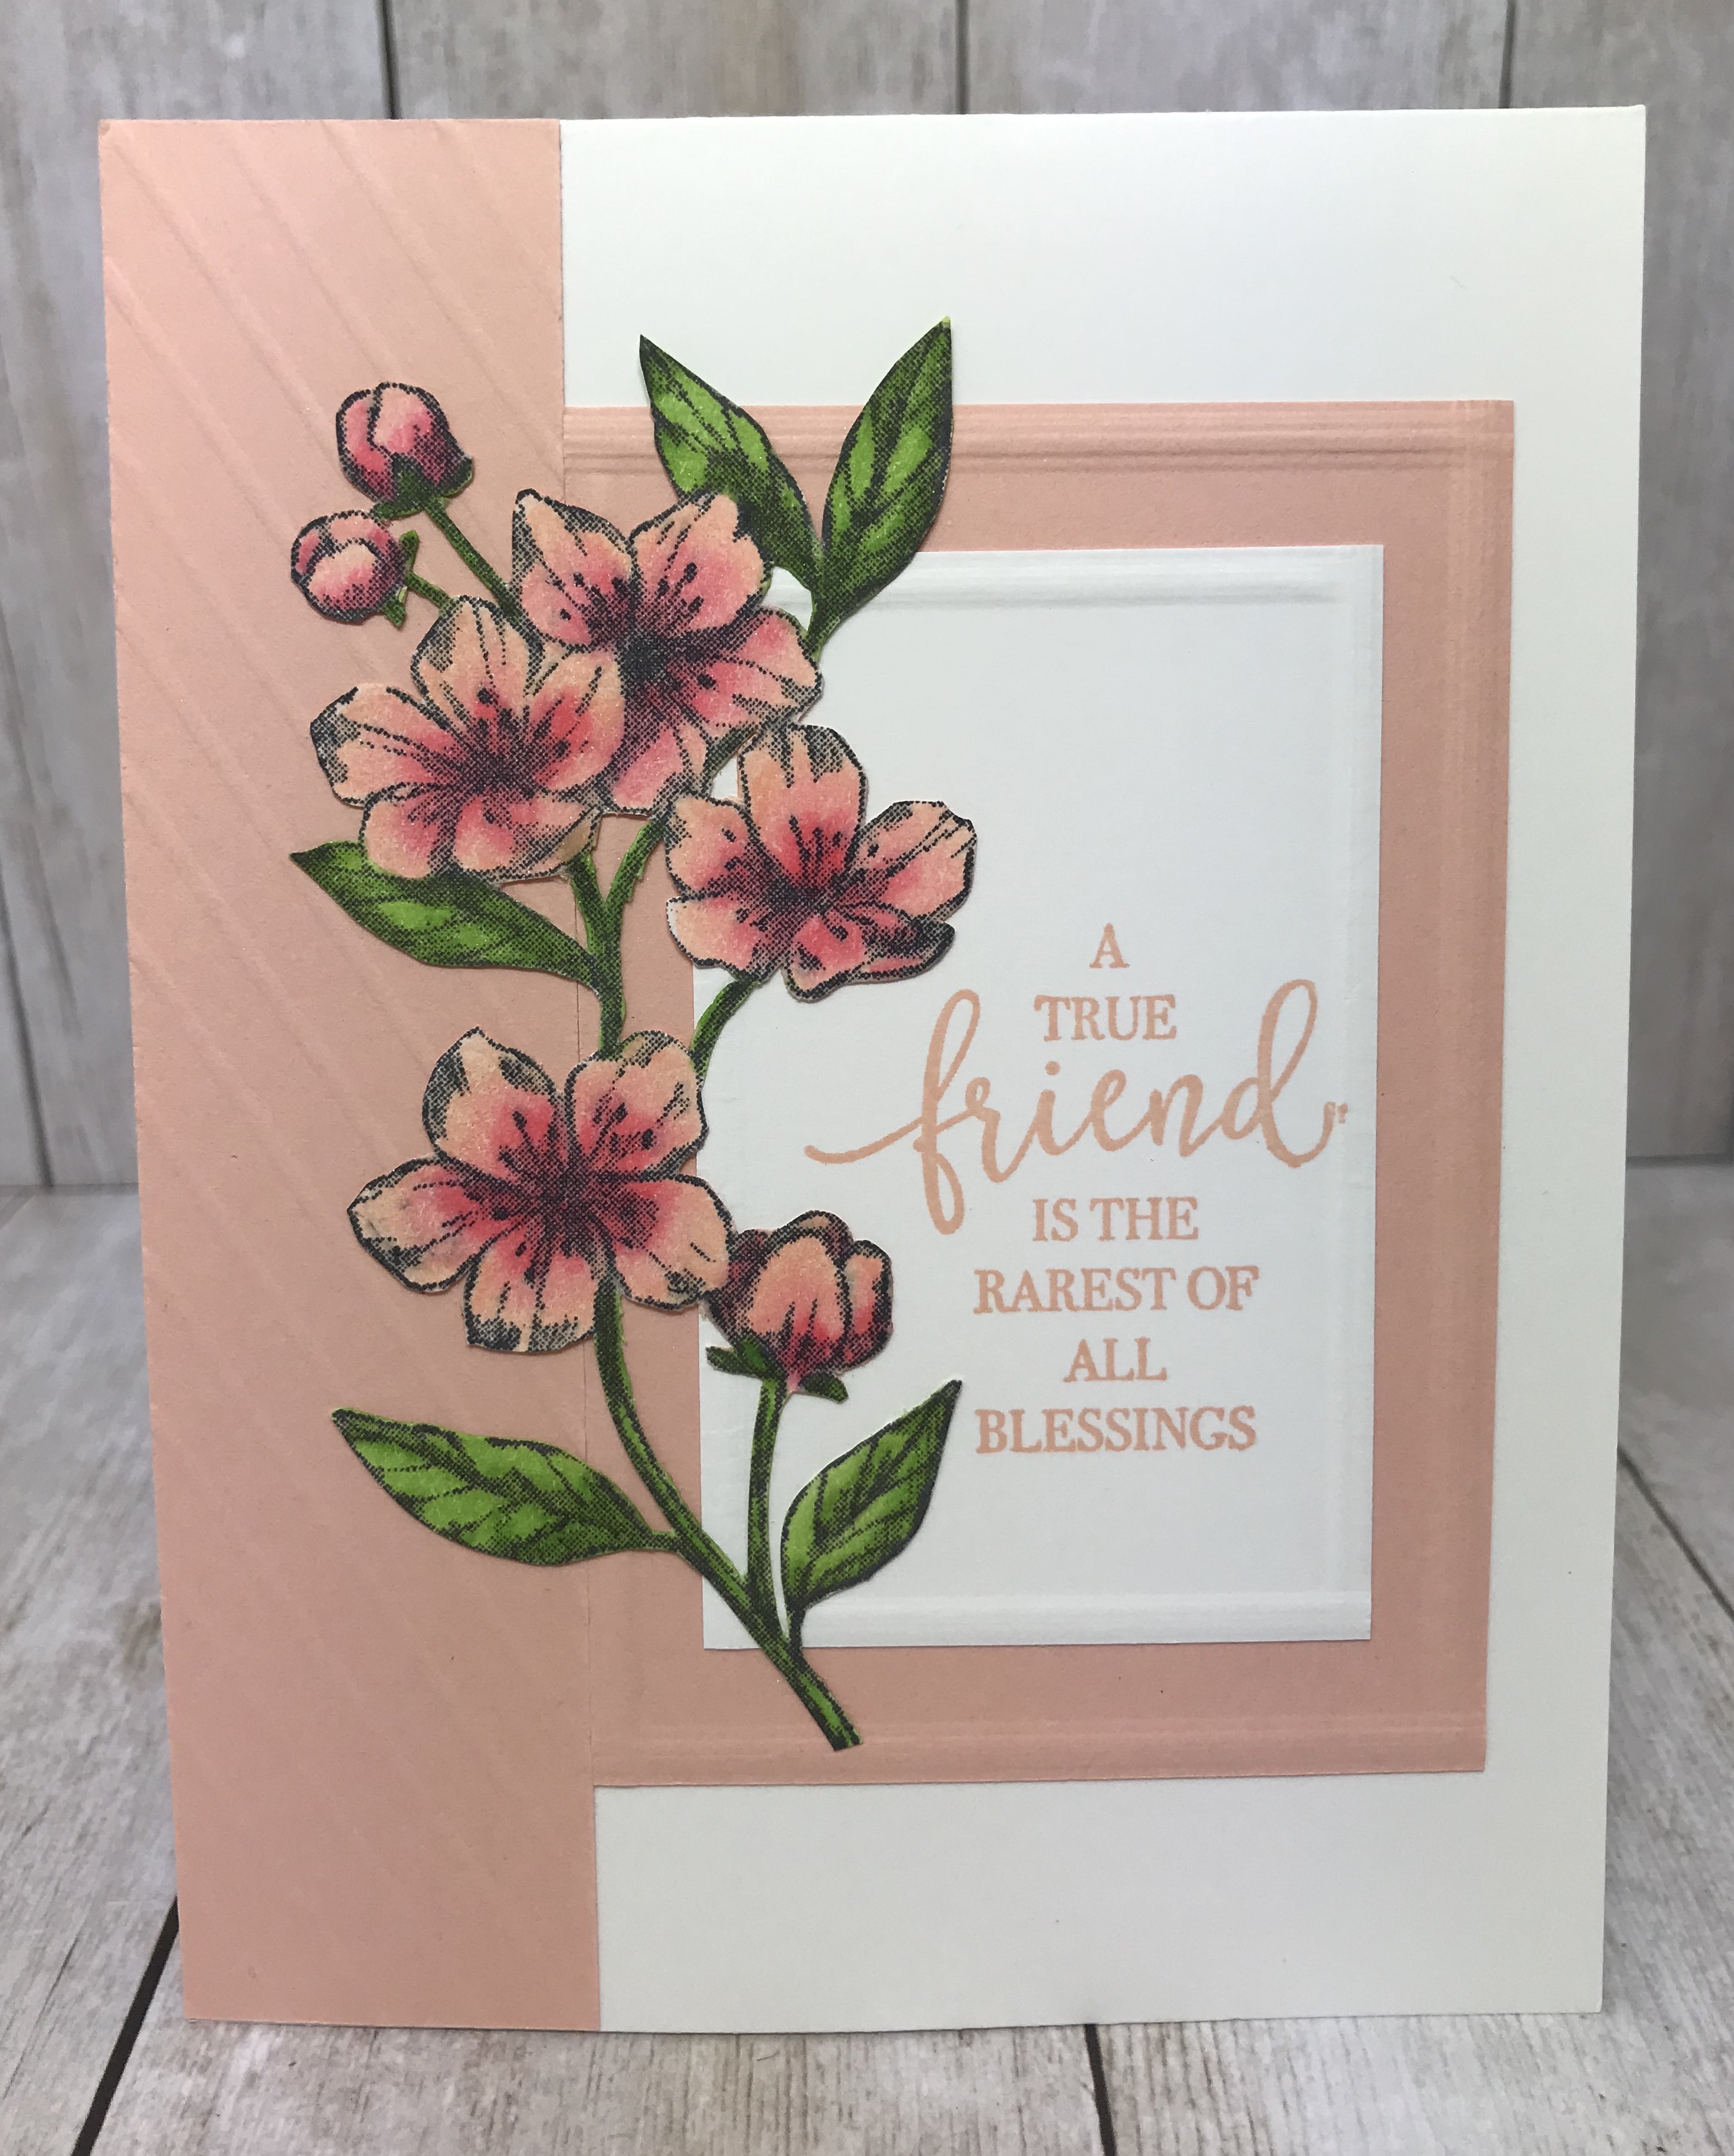 This is a team stamp camp card done by Sara Hoogendoorn. My challenge for April was Simple Stamping. Details are on my blog here: https://wp.me/p59VWq-aYX #stampinup #thestampcamp #simplestamping